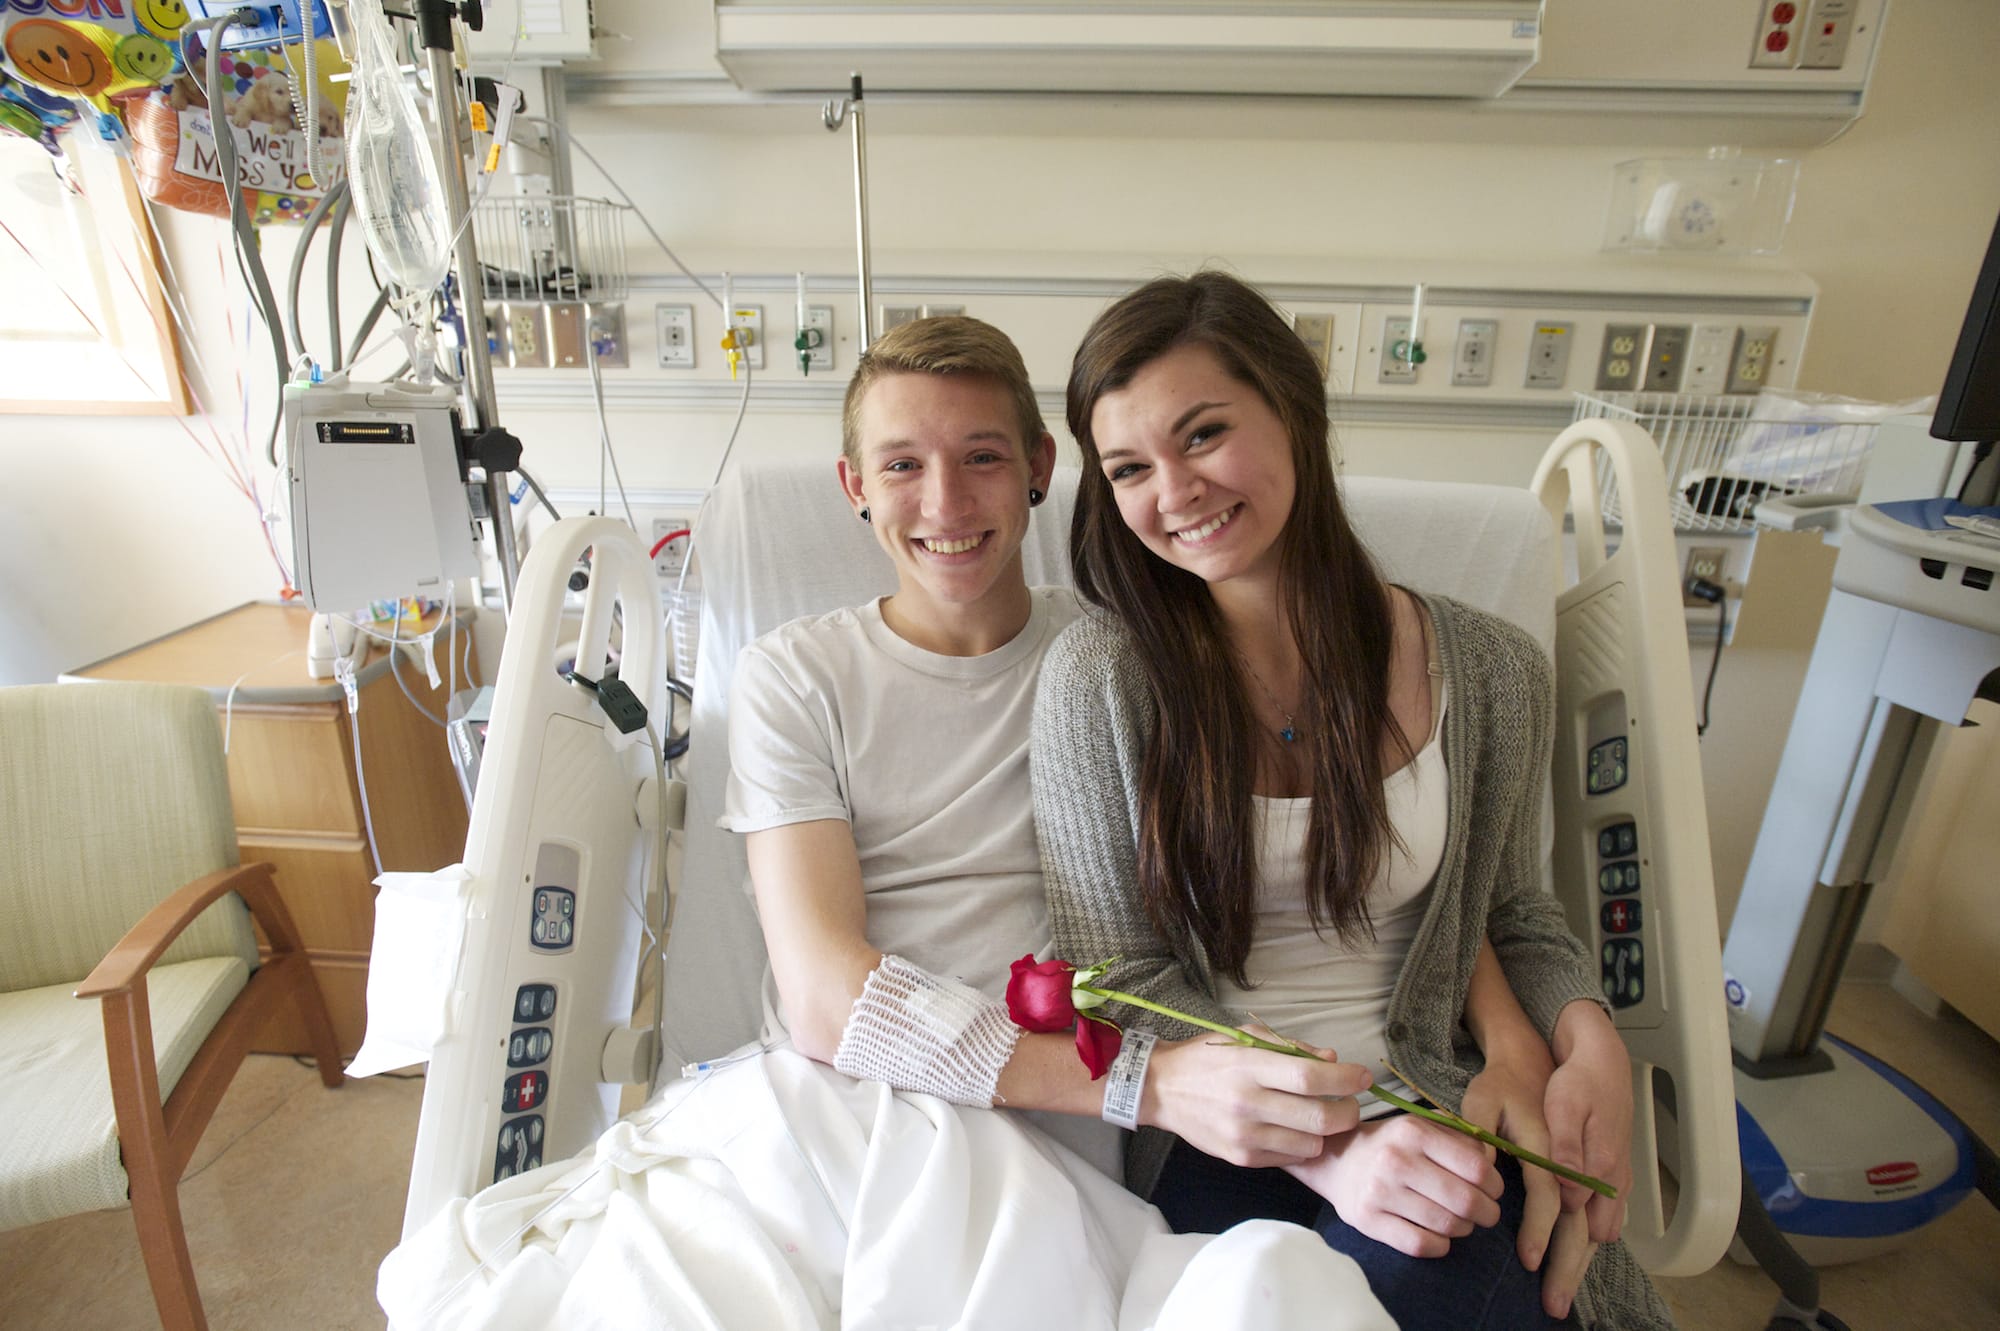 Jacob Linnell, 18, and his girlfriend, Lydia Lynch, 18, talk about the surprise mini prom staff at Legacy Salmon Creek Medical Center organized for them.